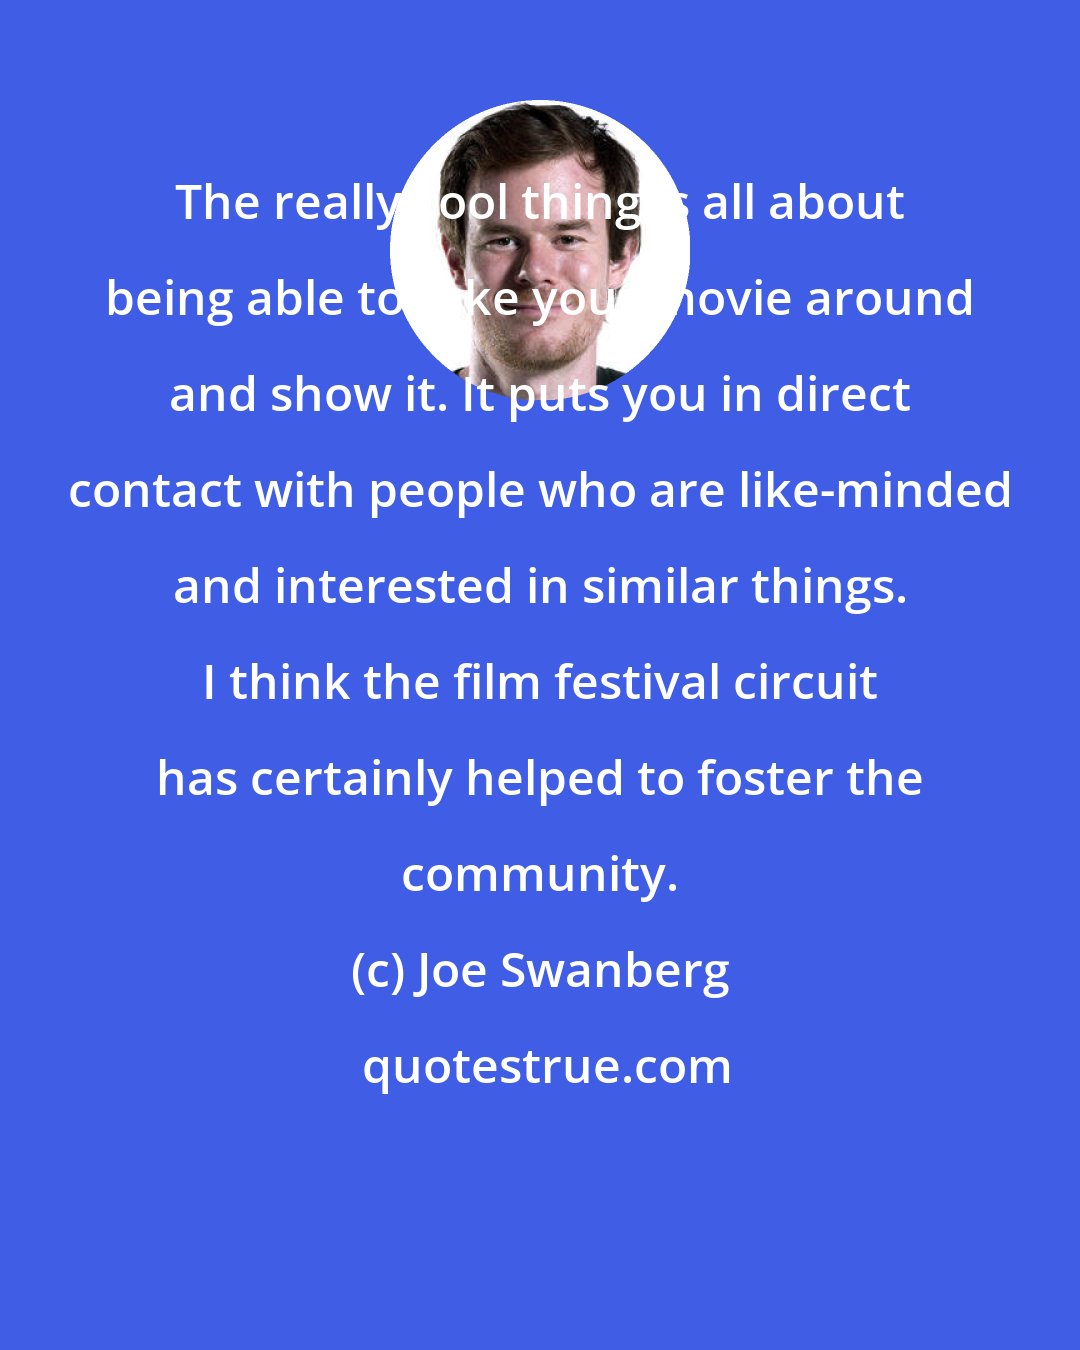 Joe Swanberg: The really cool thing is all about being able to take your movie around and show it. It puts you in direct contact with people who are like-minded and interested in similar things. I think the film festival circuit has certainly helped to foster the community.